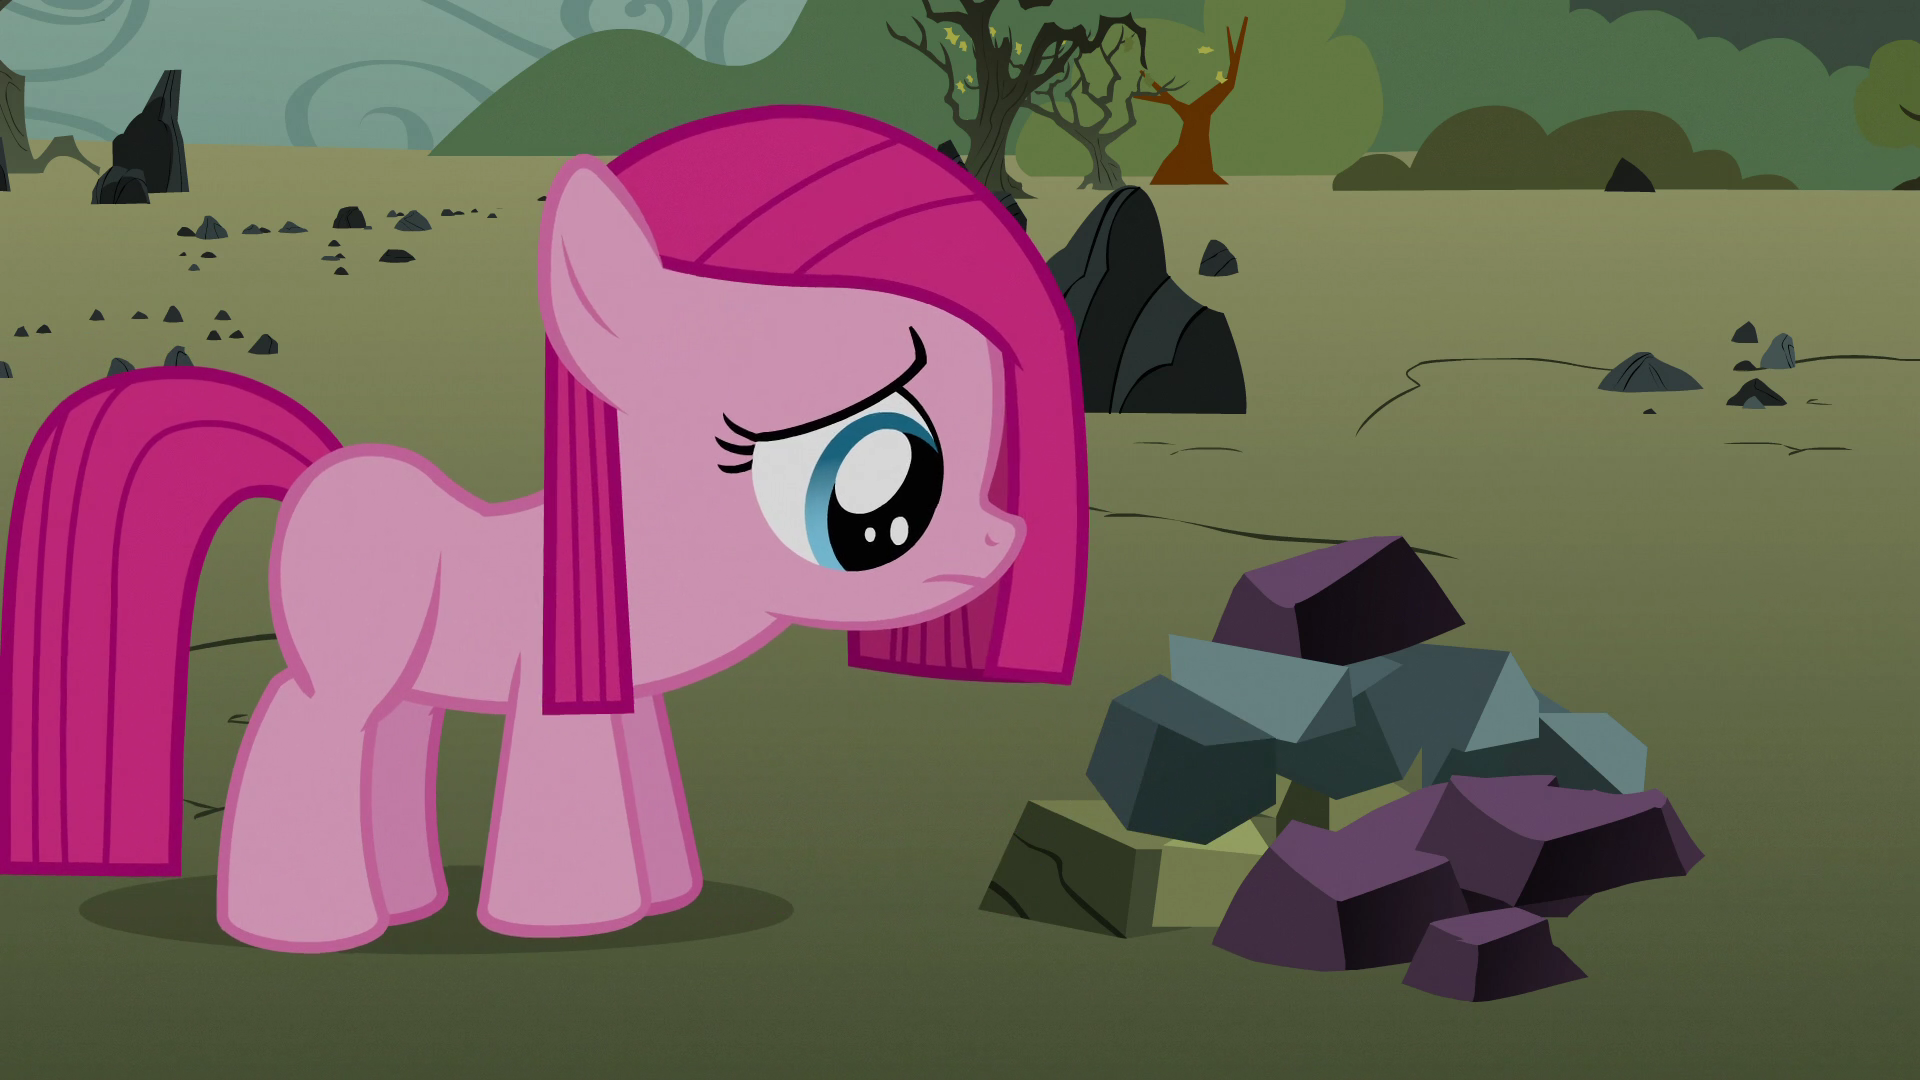 Do You Think Pinkie Pies Parents Are Responsible For Her Unhappiness